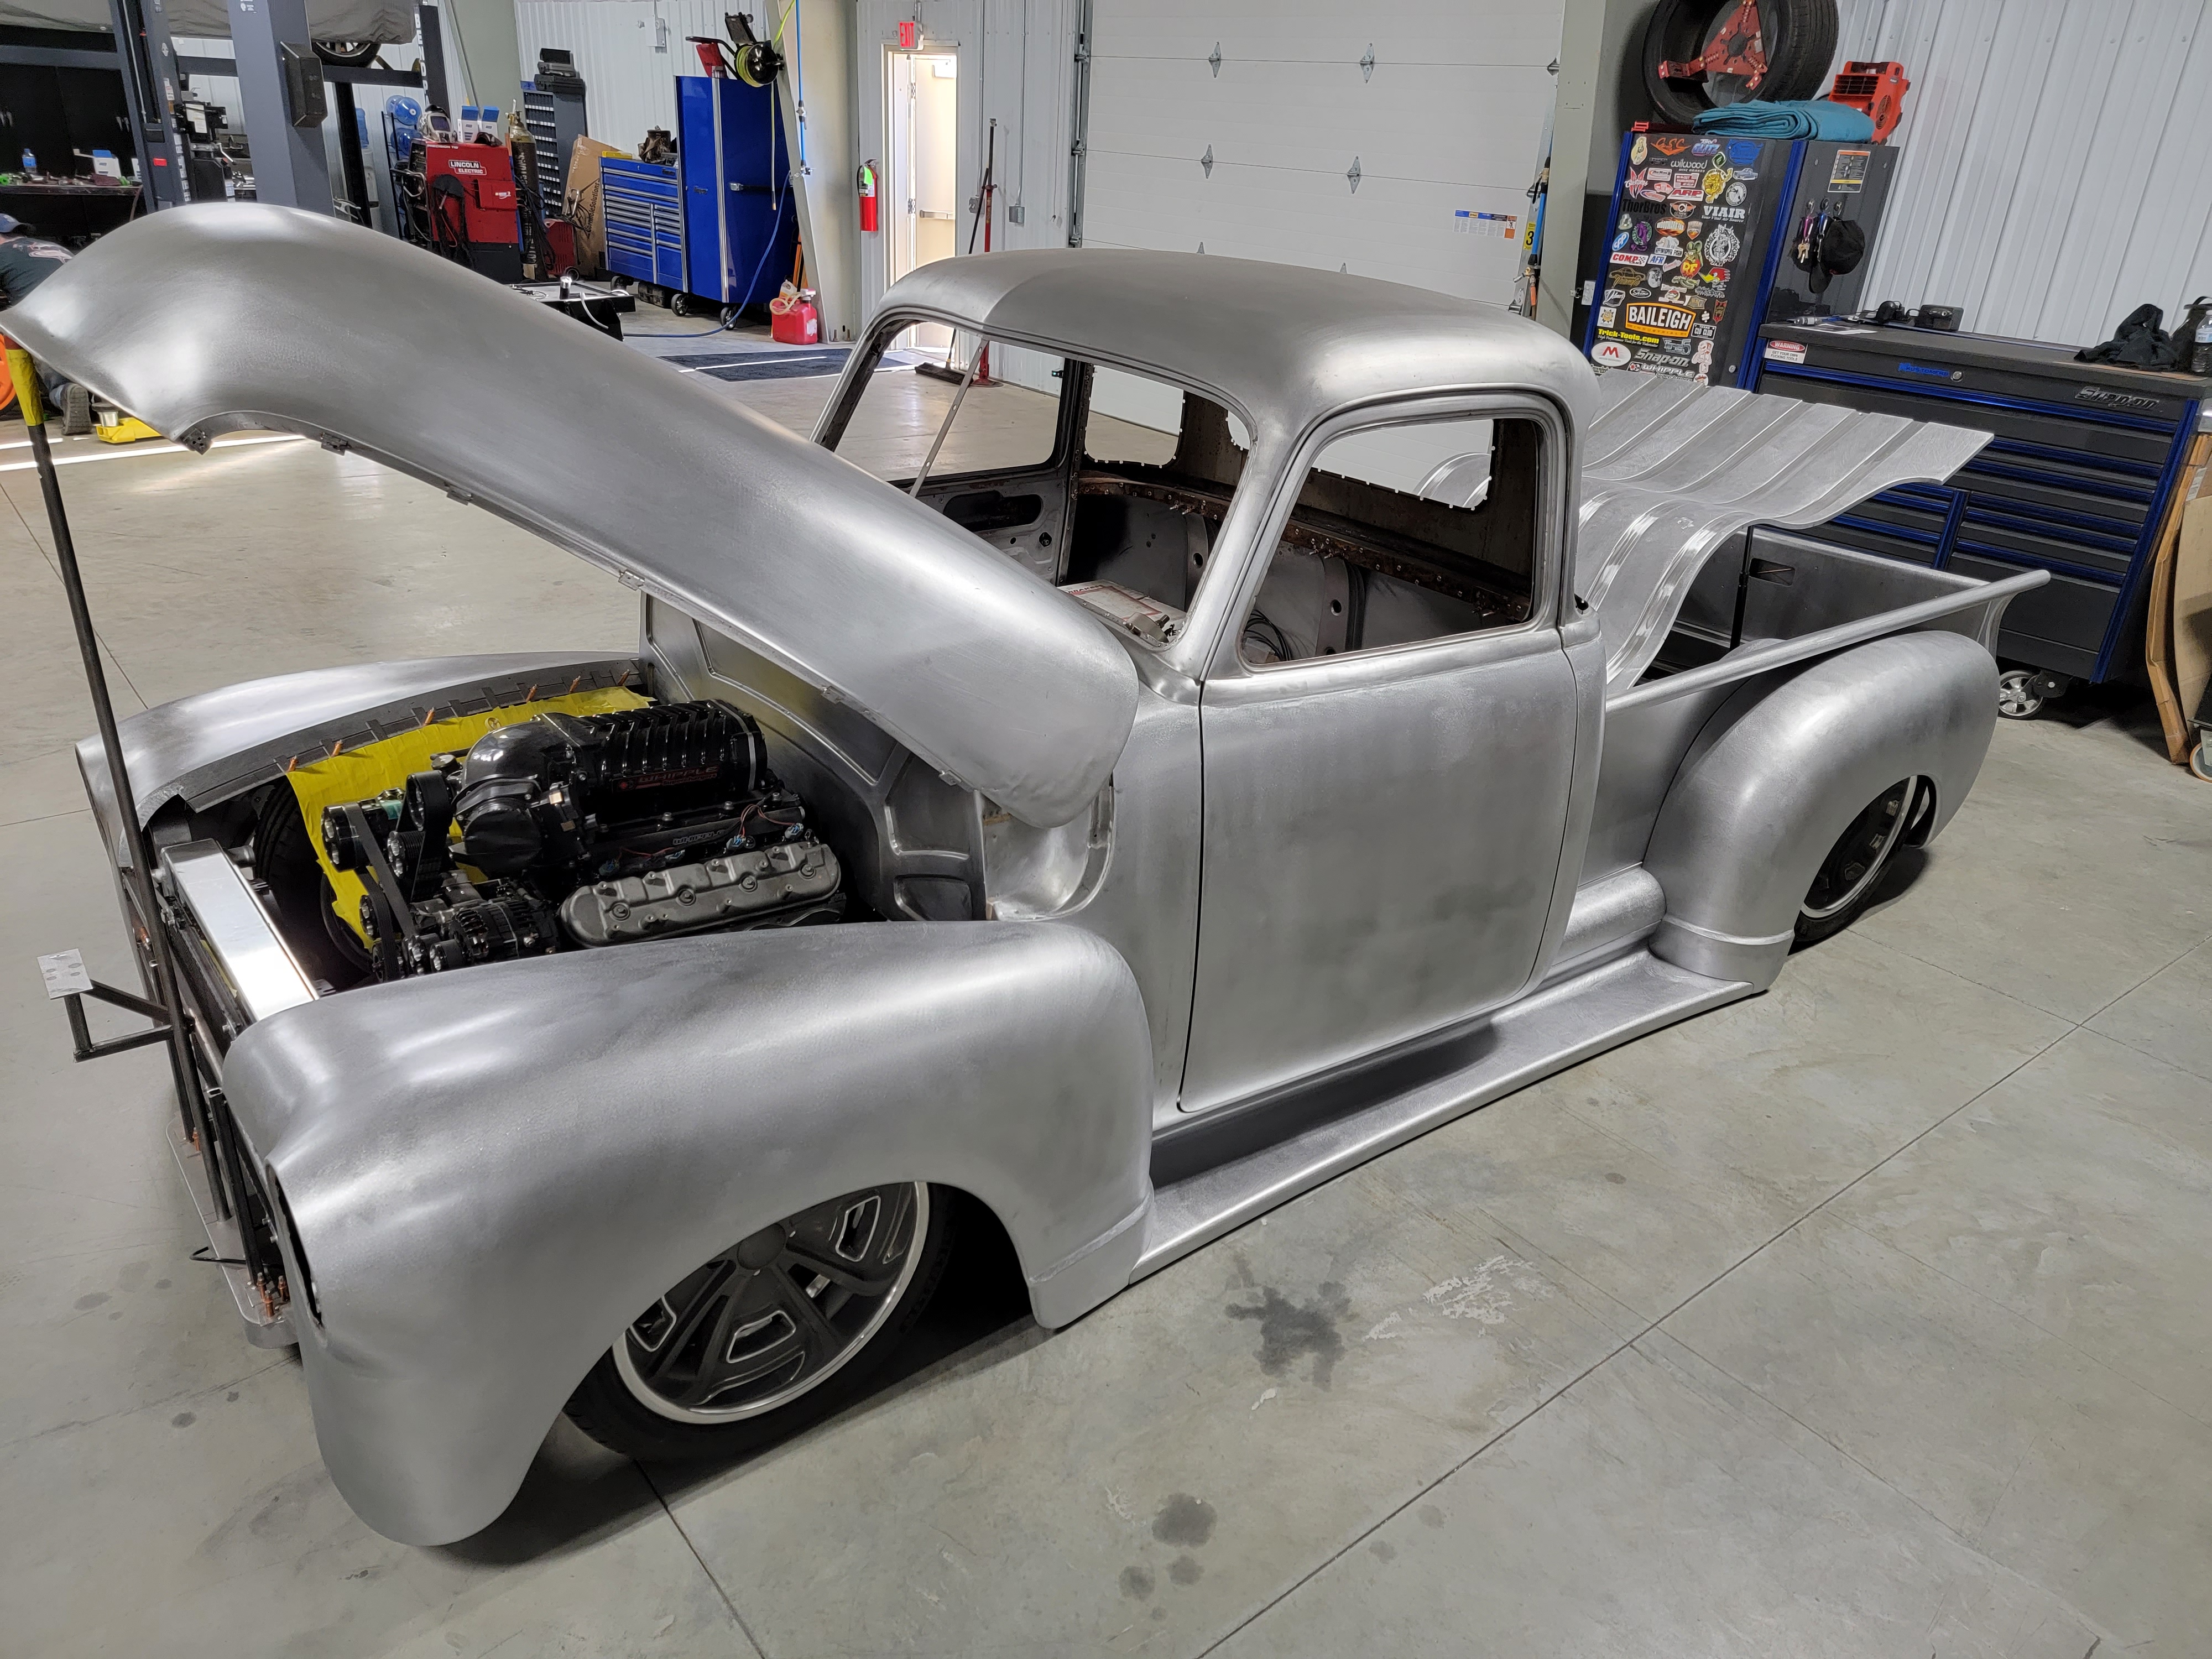 scotts-hotrods-51-chevy-project-truck-2601